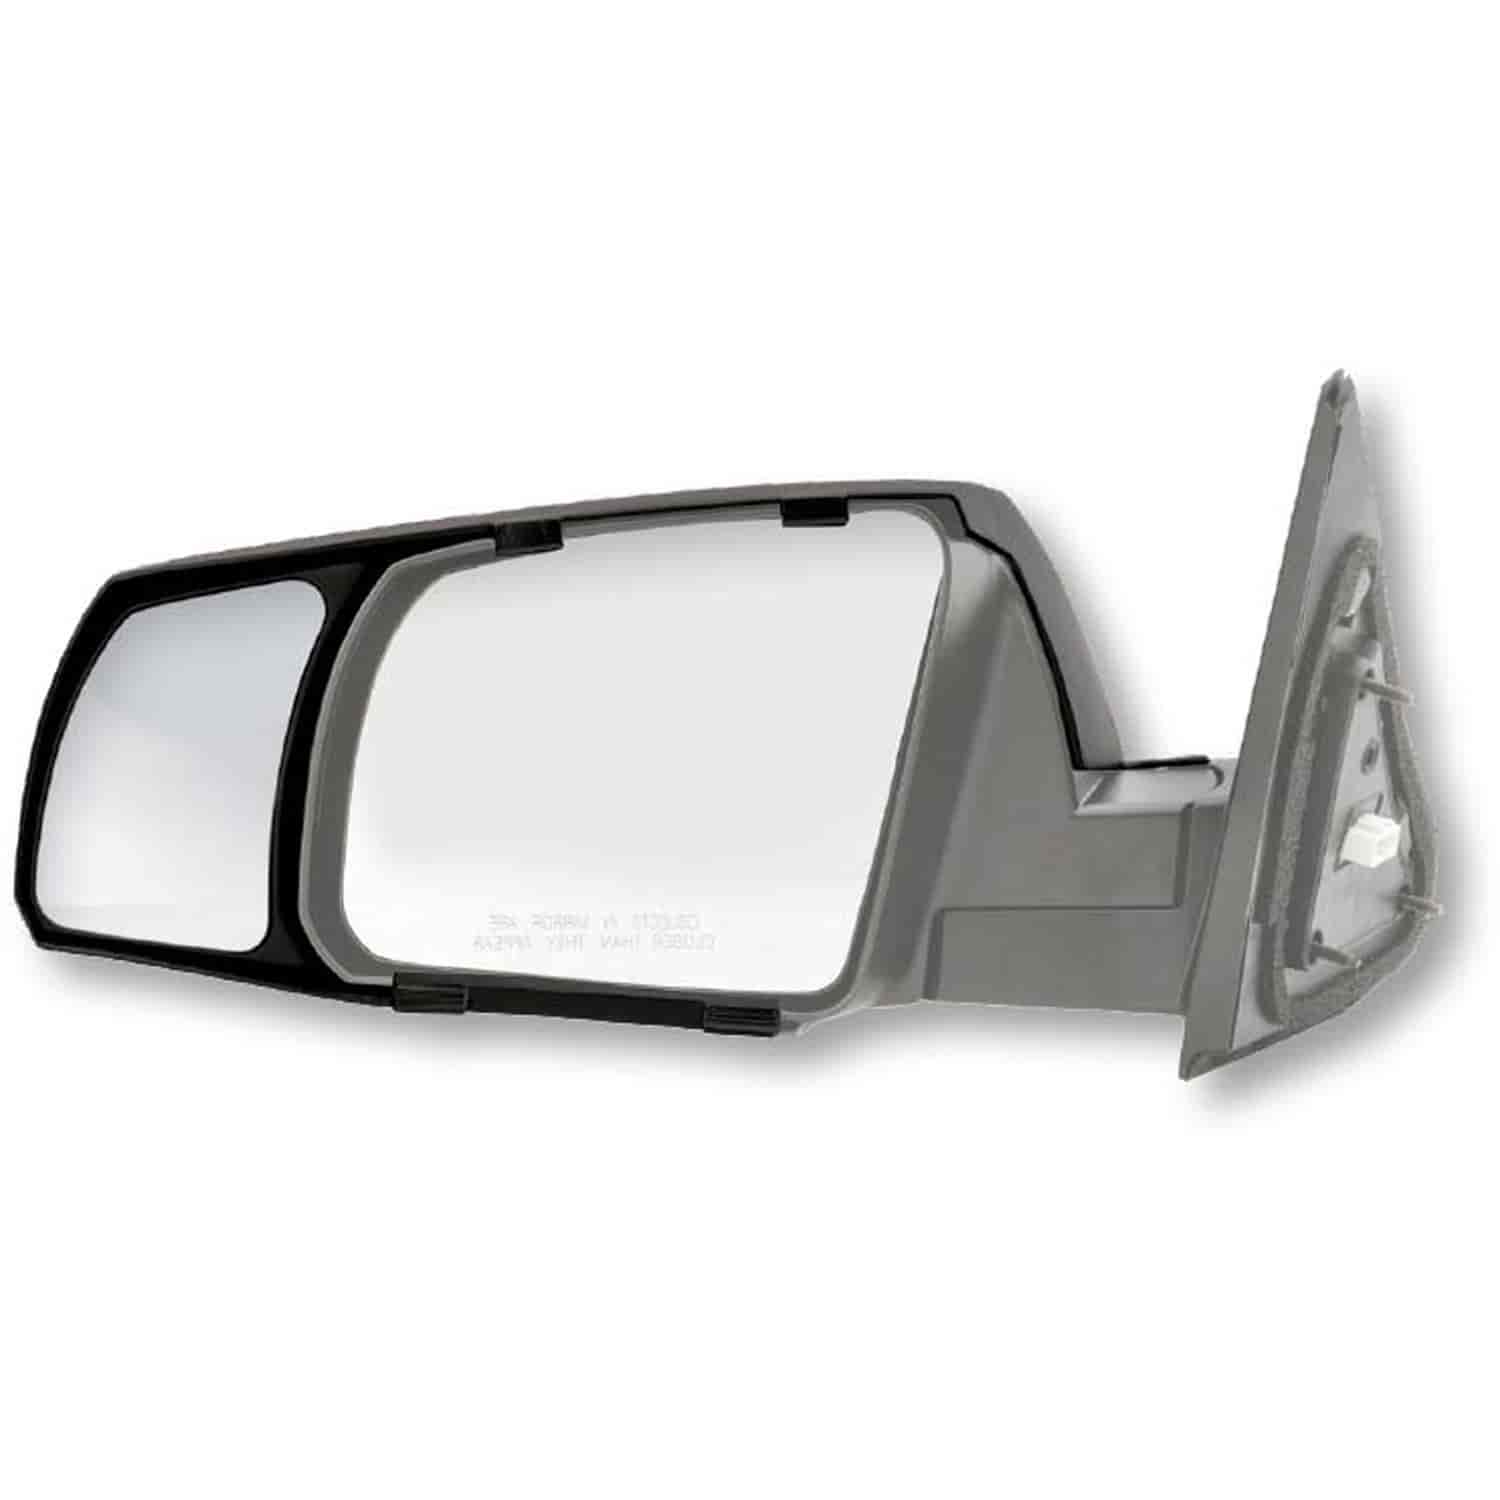 Snap-On Towing Mirrors Fits 2007 to 2014 Toyota